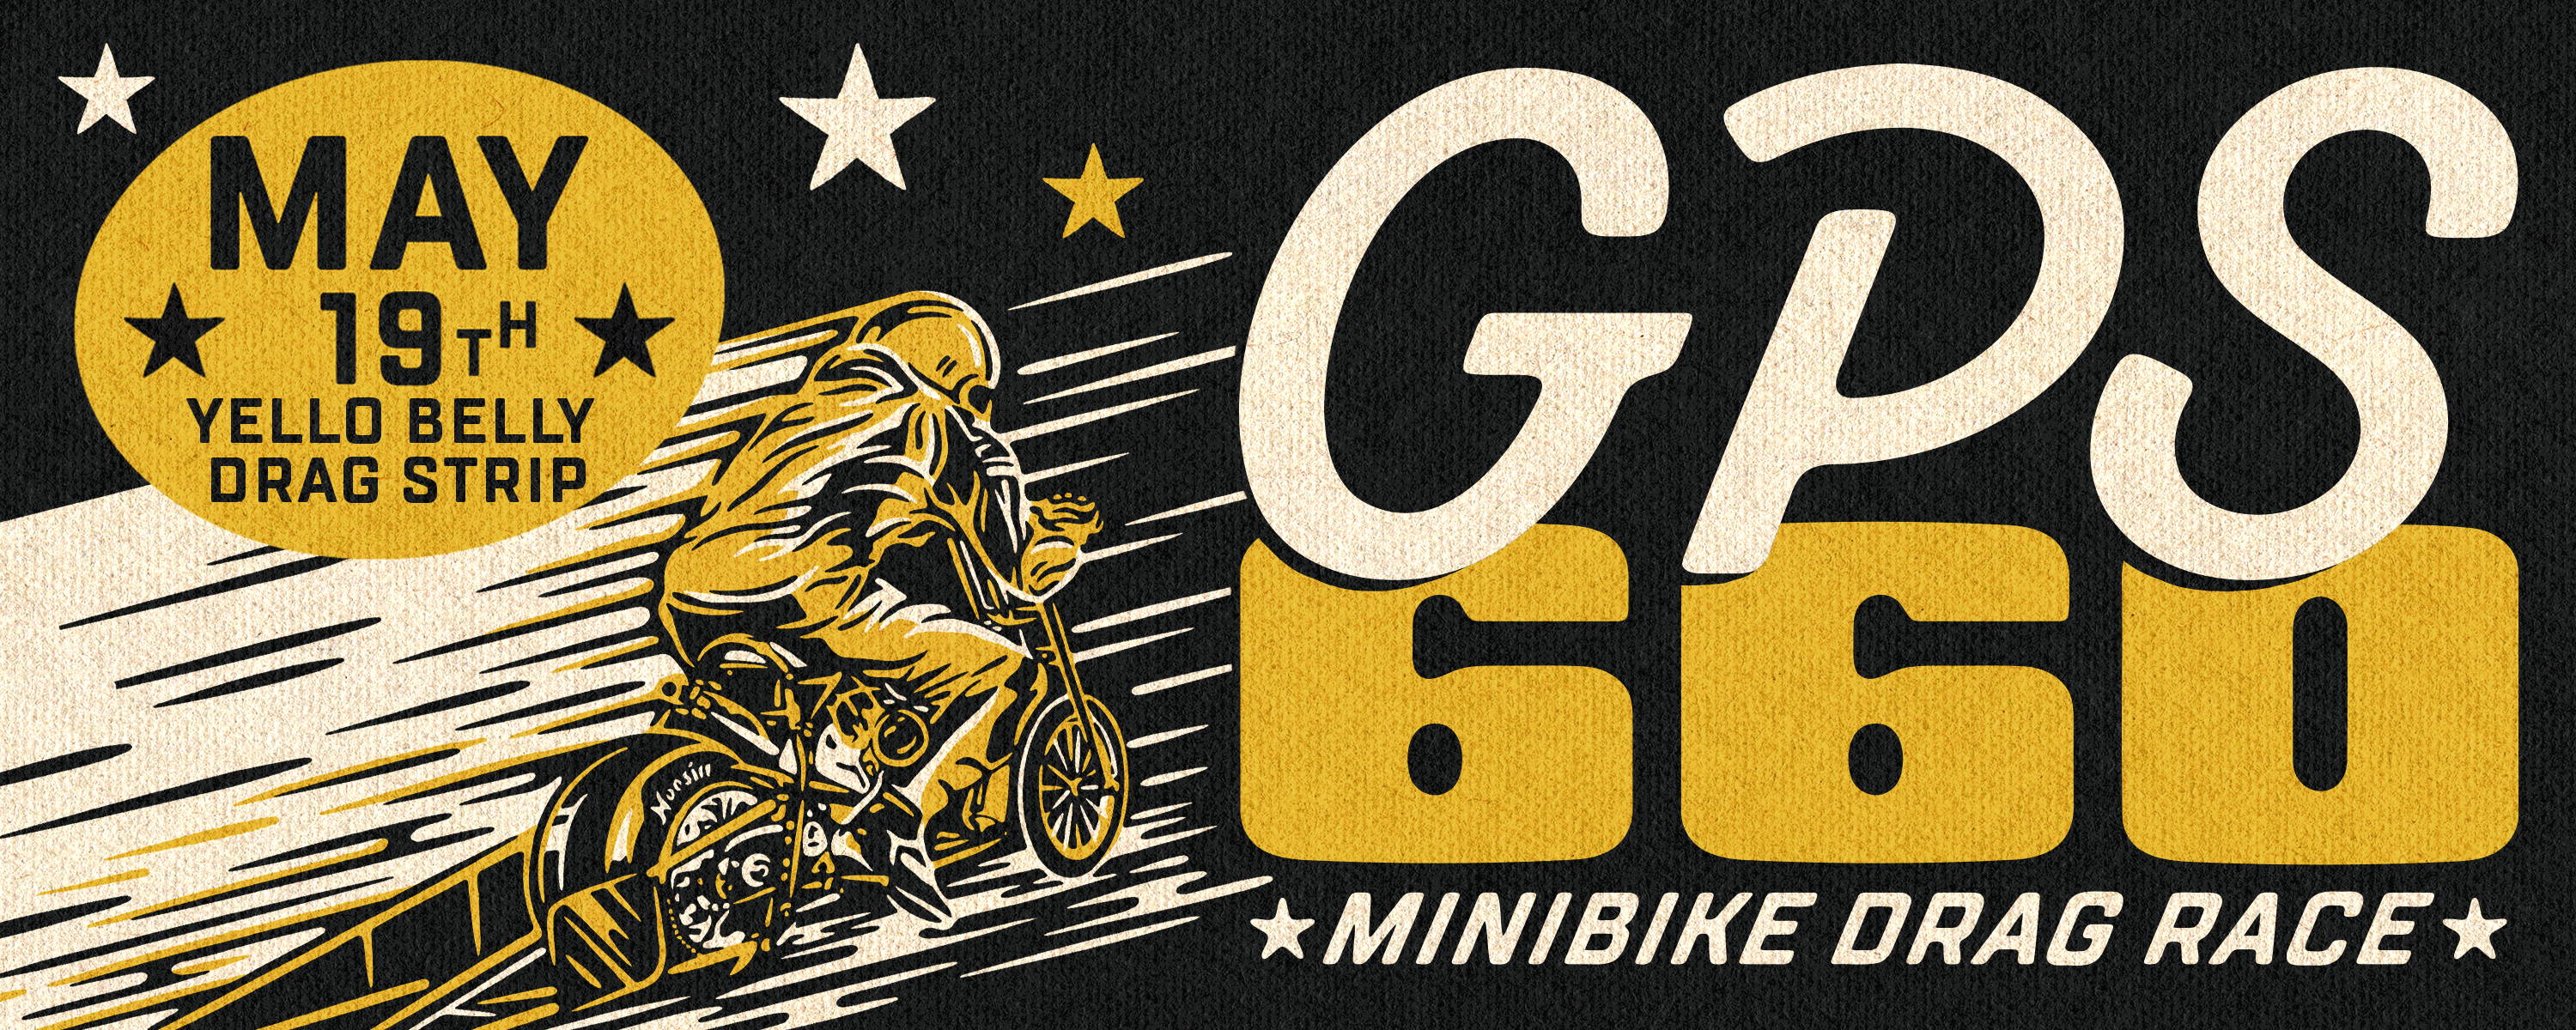 GPS660 Minibike Drag Race presented by GoPowerSports